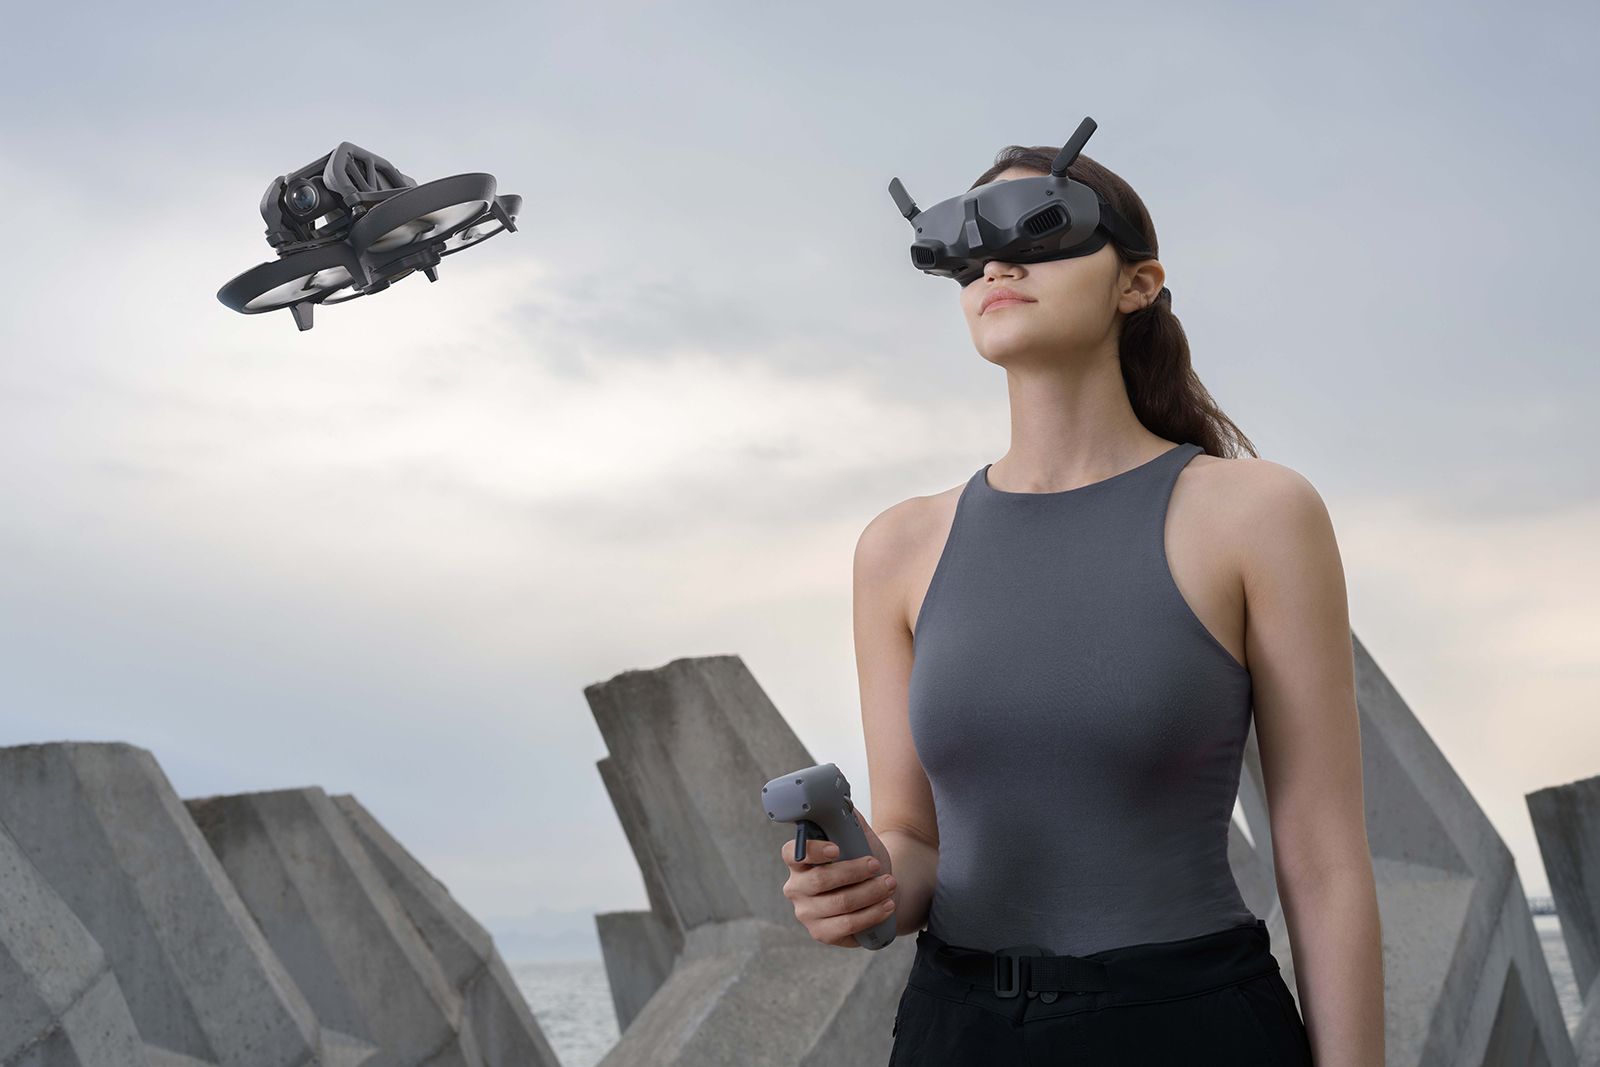 DJI launches new FPV Goggles and motion controller for the Avata drone